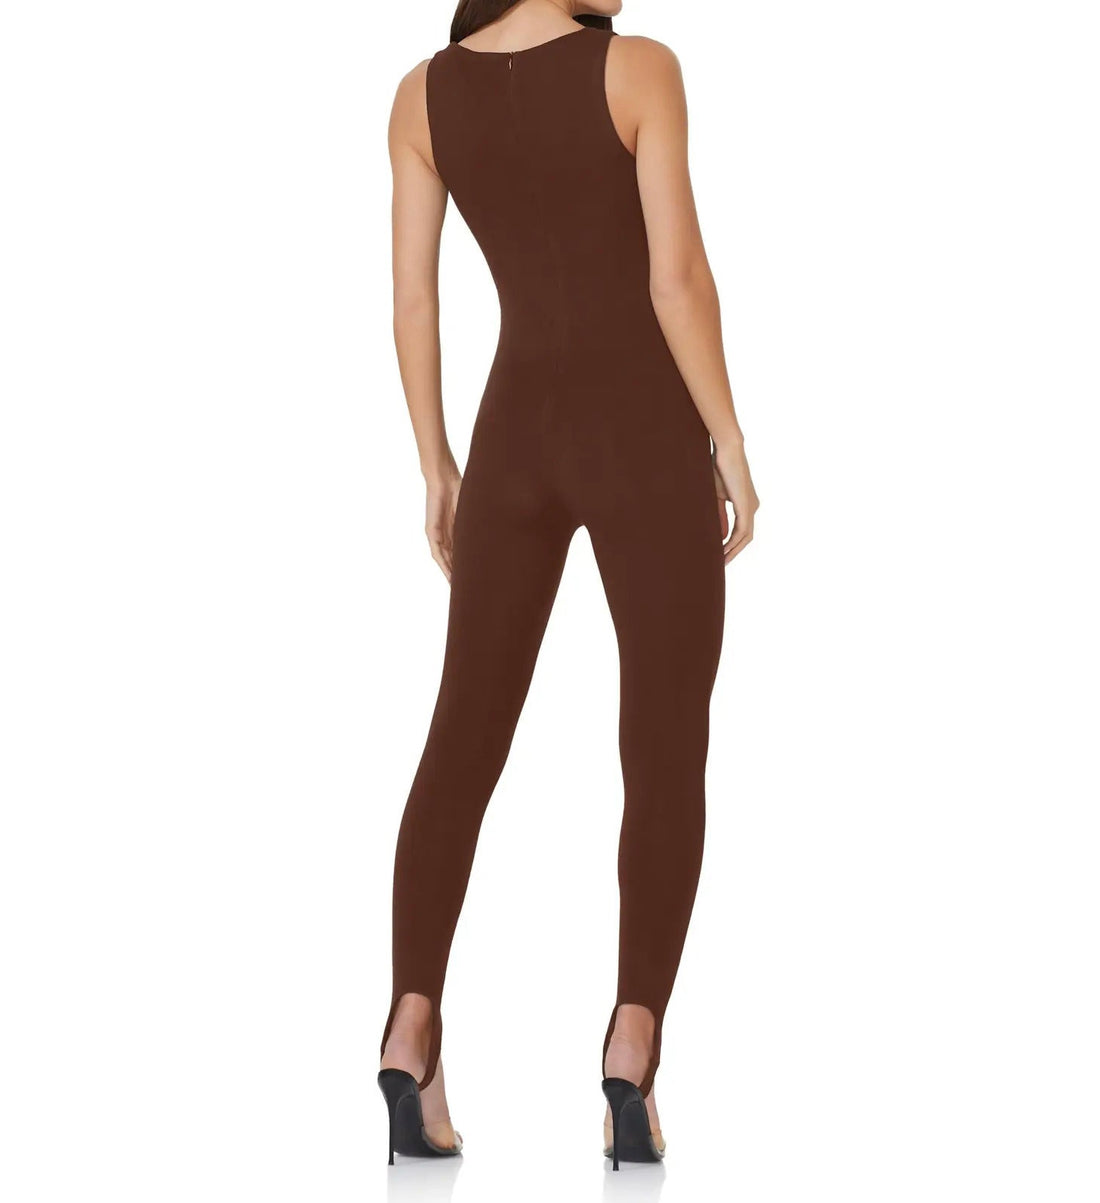 Avery Catsuit in Cappuccino